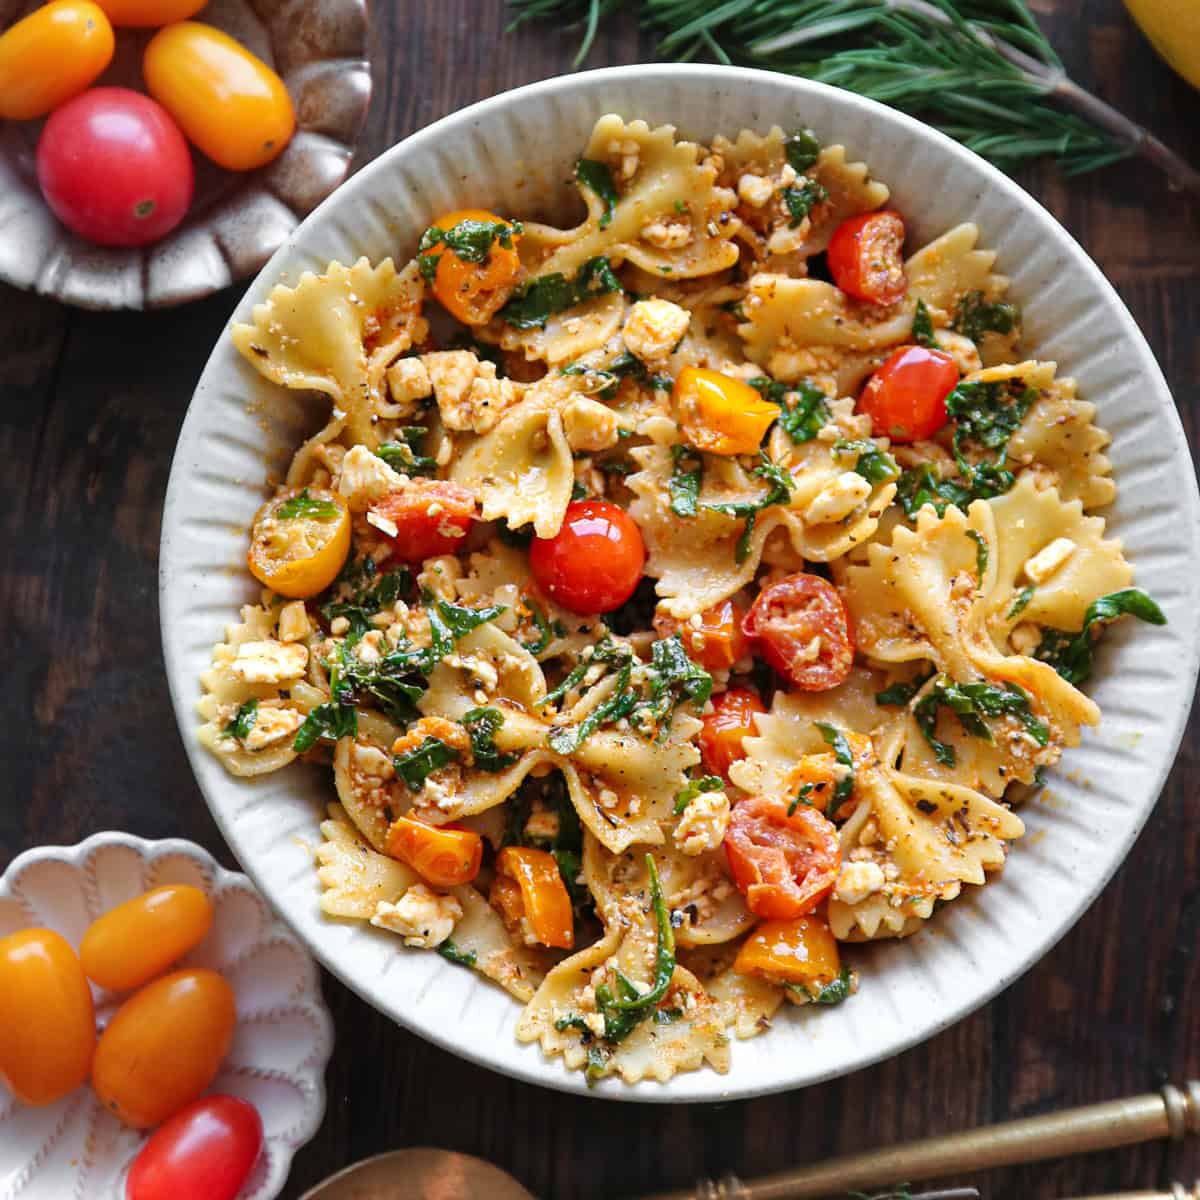 Pasta with Feta Cheese, Cherry Tomatoes, Spinach - in a white bowl.